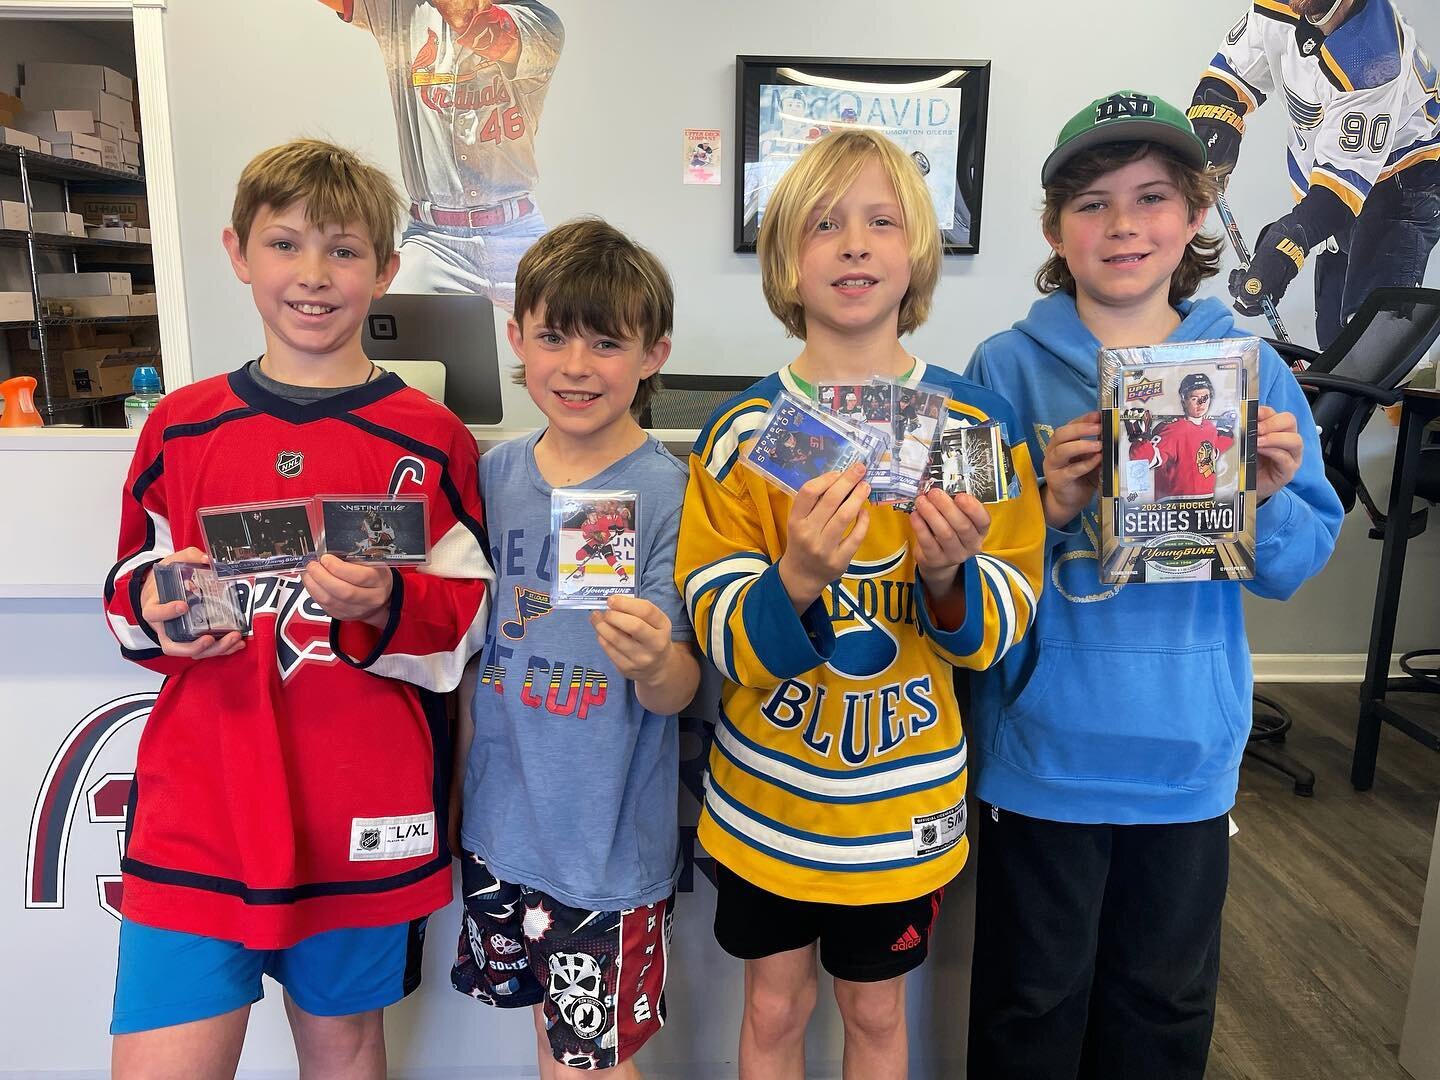 Huge congrats to these young hockey fans on some incredible pulls from @upperdecksports Series 2 NHL today! Nothing better than spending a Saturday ripping hockey packs!! 

Some great hits capped off by a Bedard young guns! Great pulls boys!

#hockey